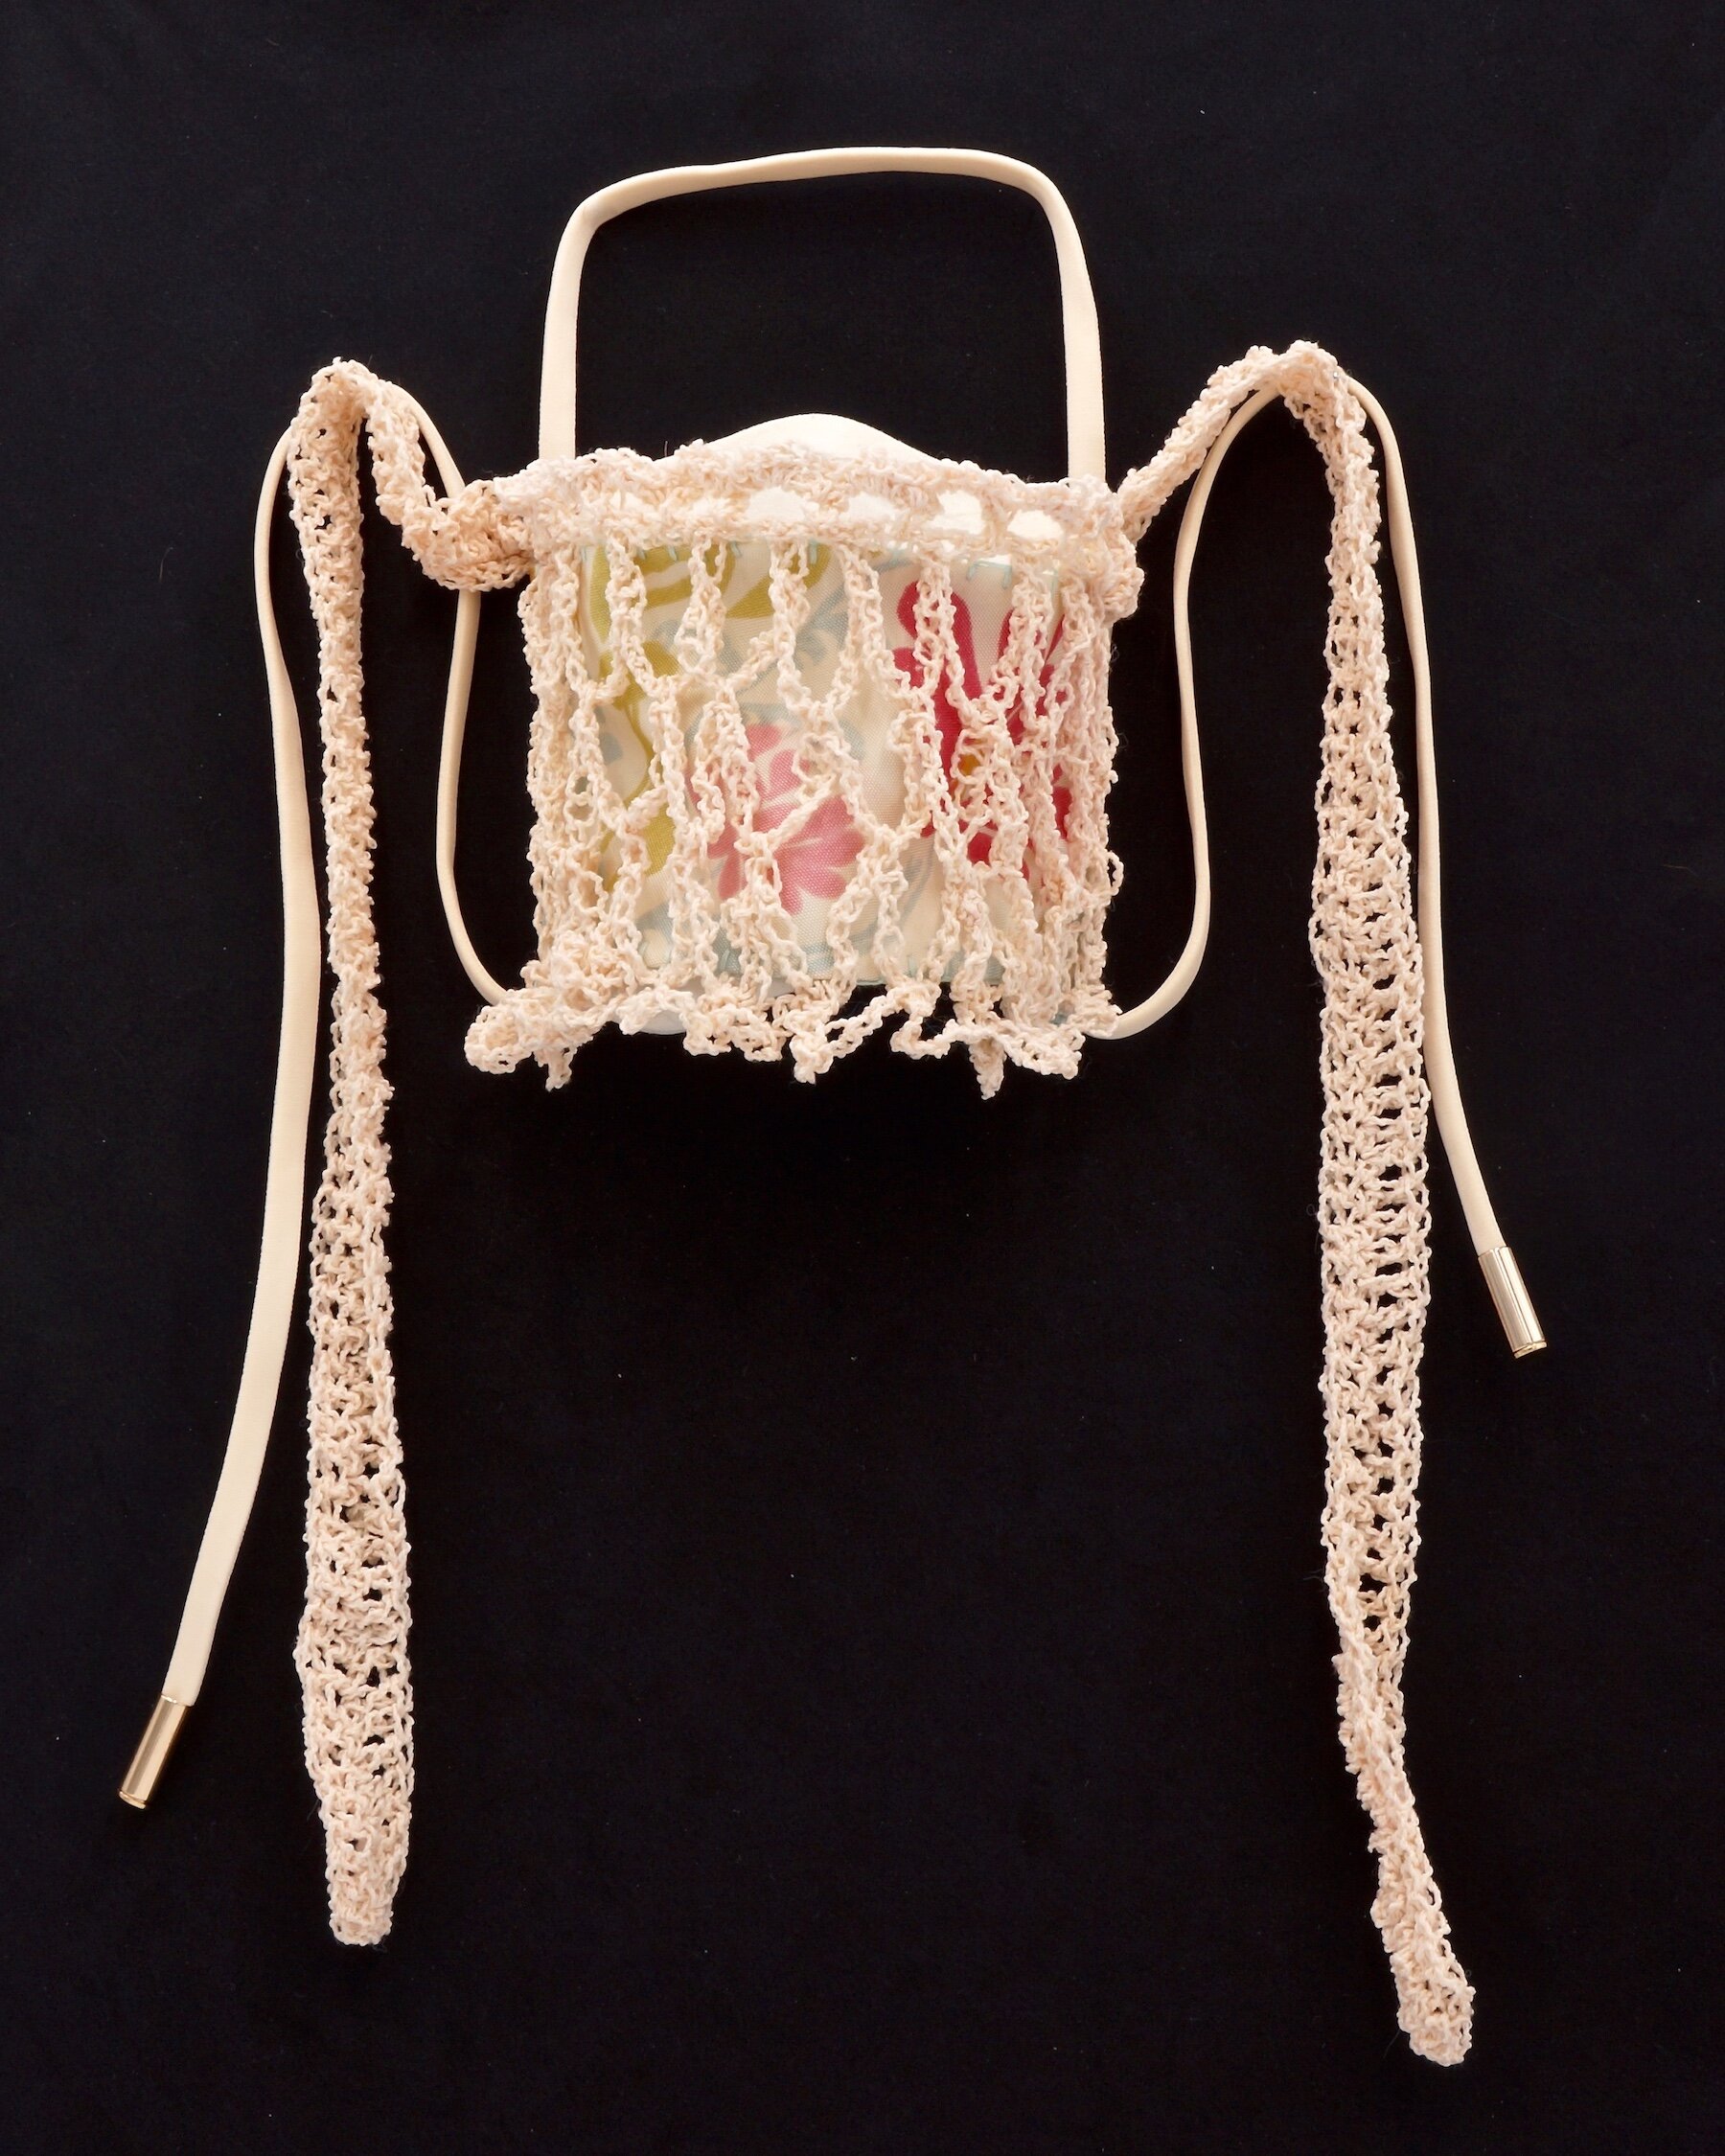    Place 4  , vintage fabric, cotton yarn, elastic cord with metal tips , crochet layered over hand sewn mask 